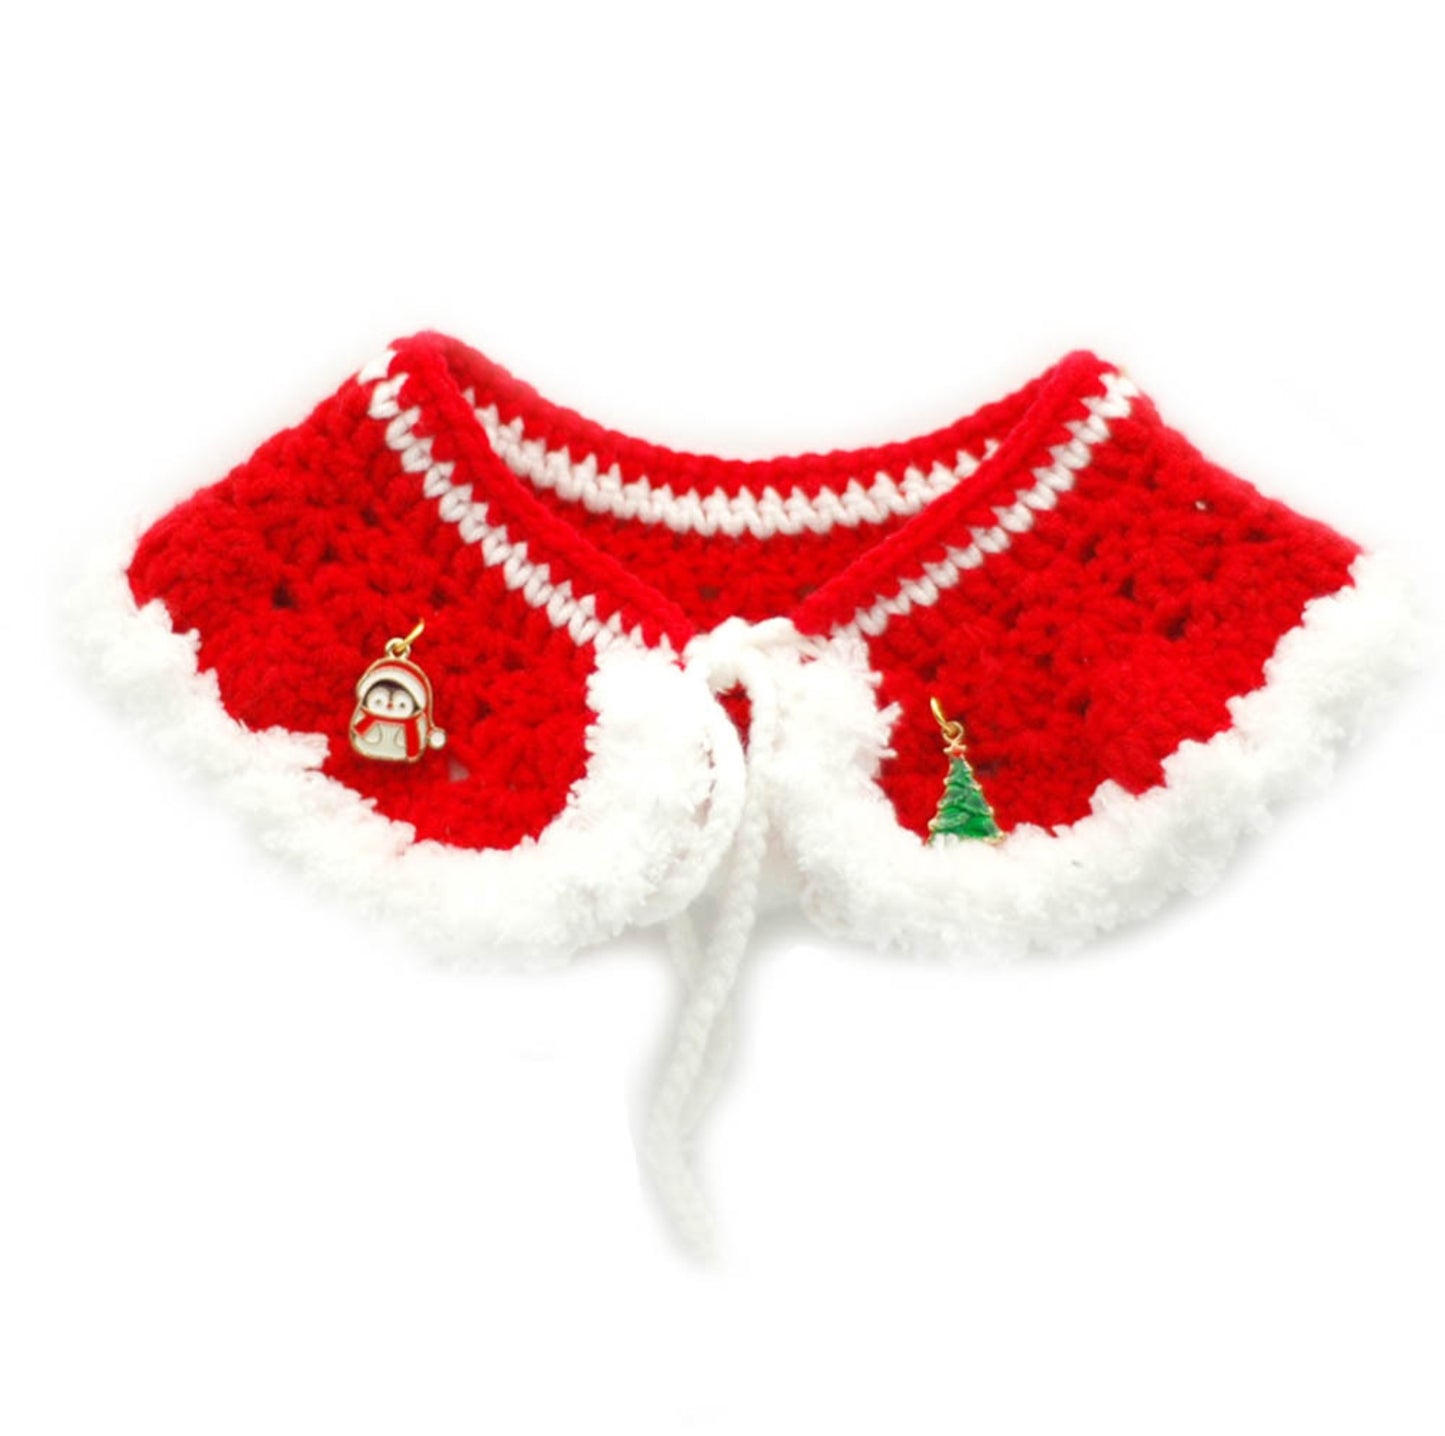 The Joy of Christmas: Hand-Knitted Pet Shawl